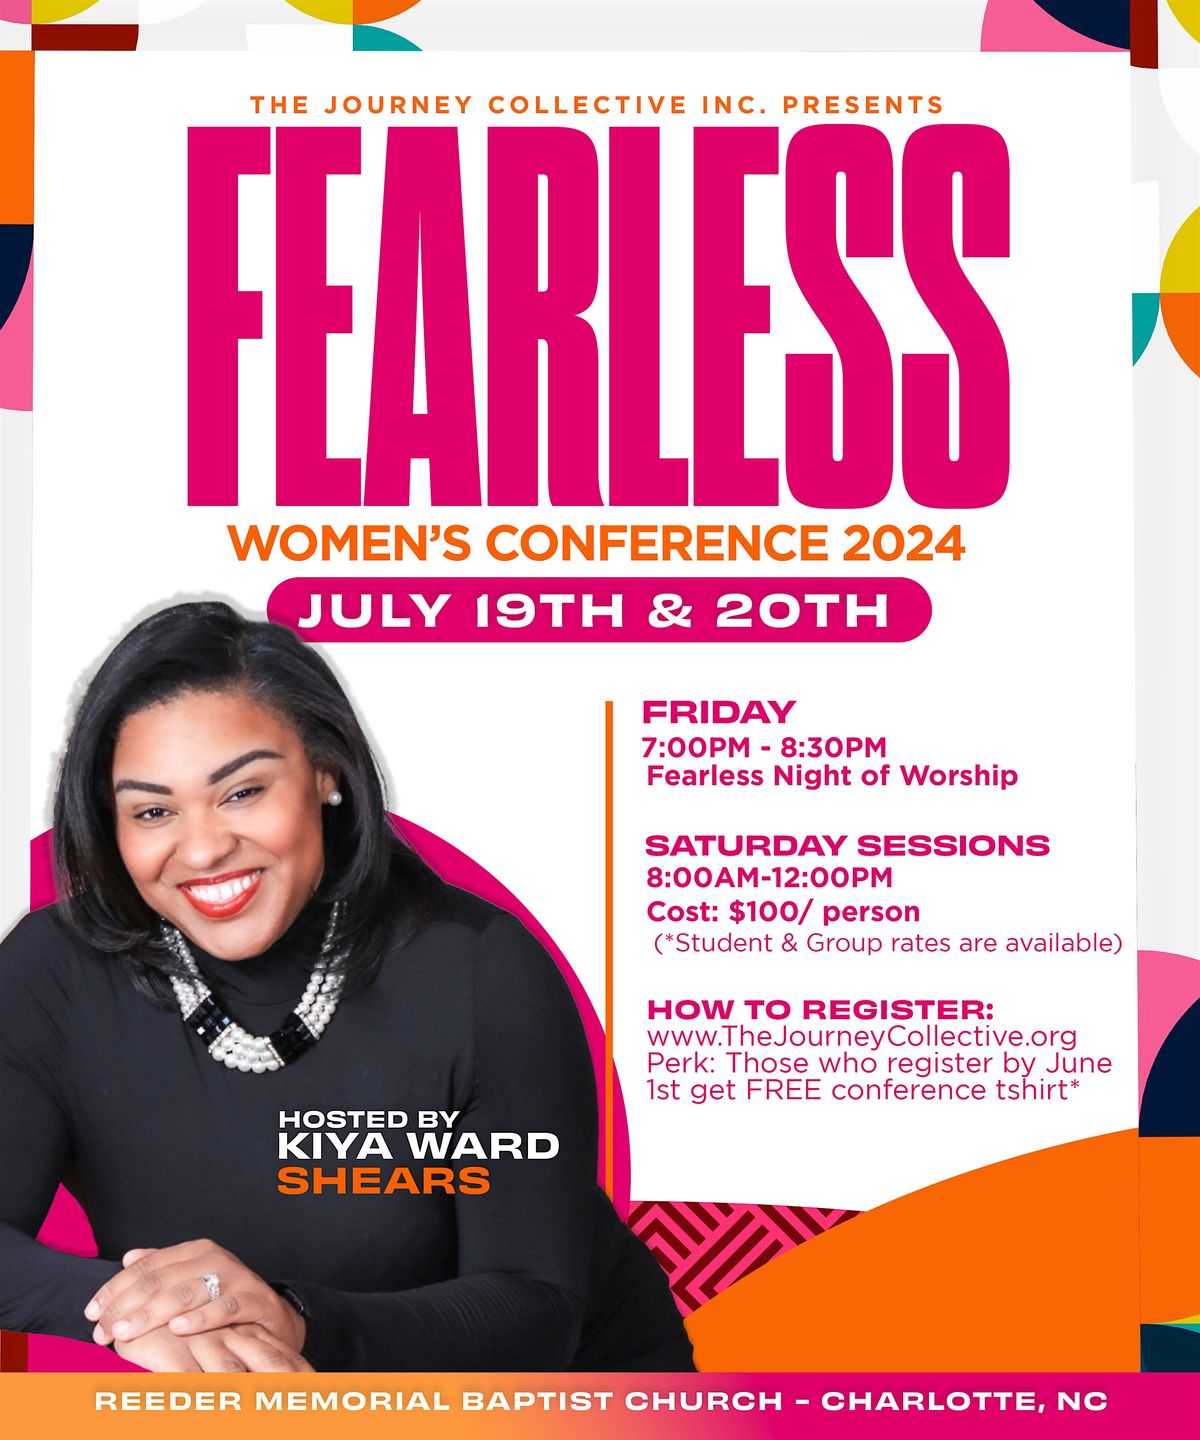 The Fearless Women's Conference